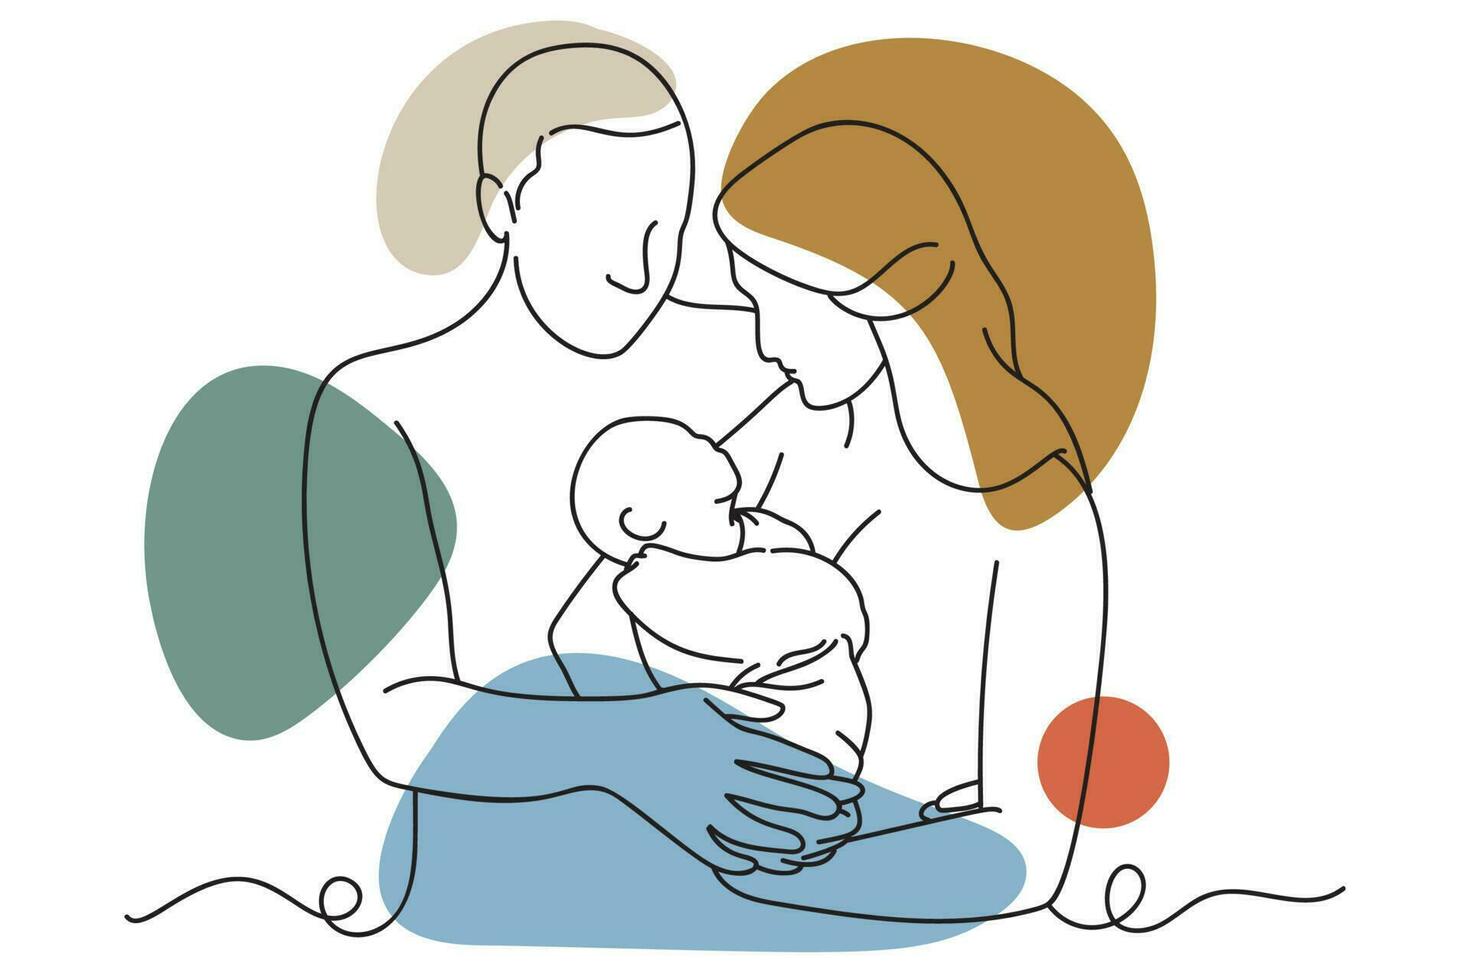 Continuous one line drawing of a happy family. Mother, father and baby. Vector illustration